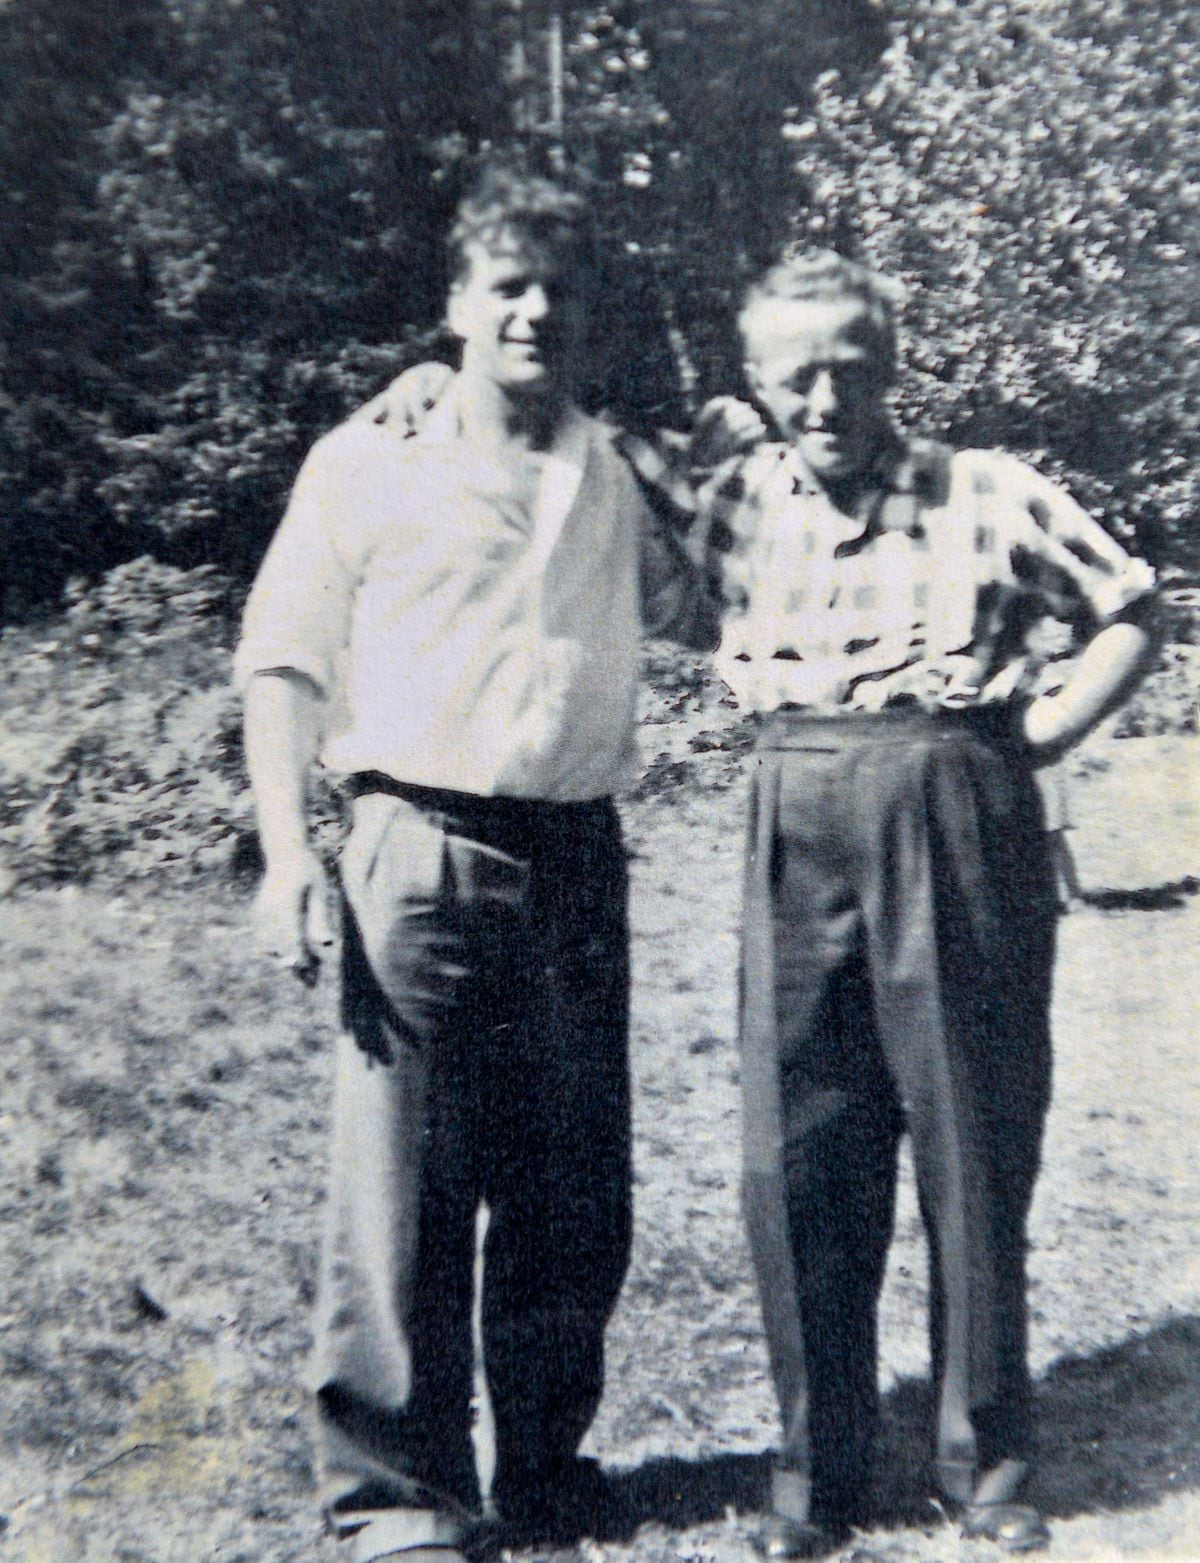 Paul Bennett, pictured with his grandfather Don (on the right ) who volunteered in the Spanish Civil War